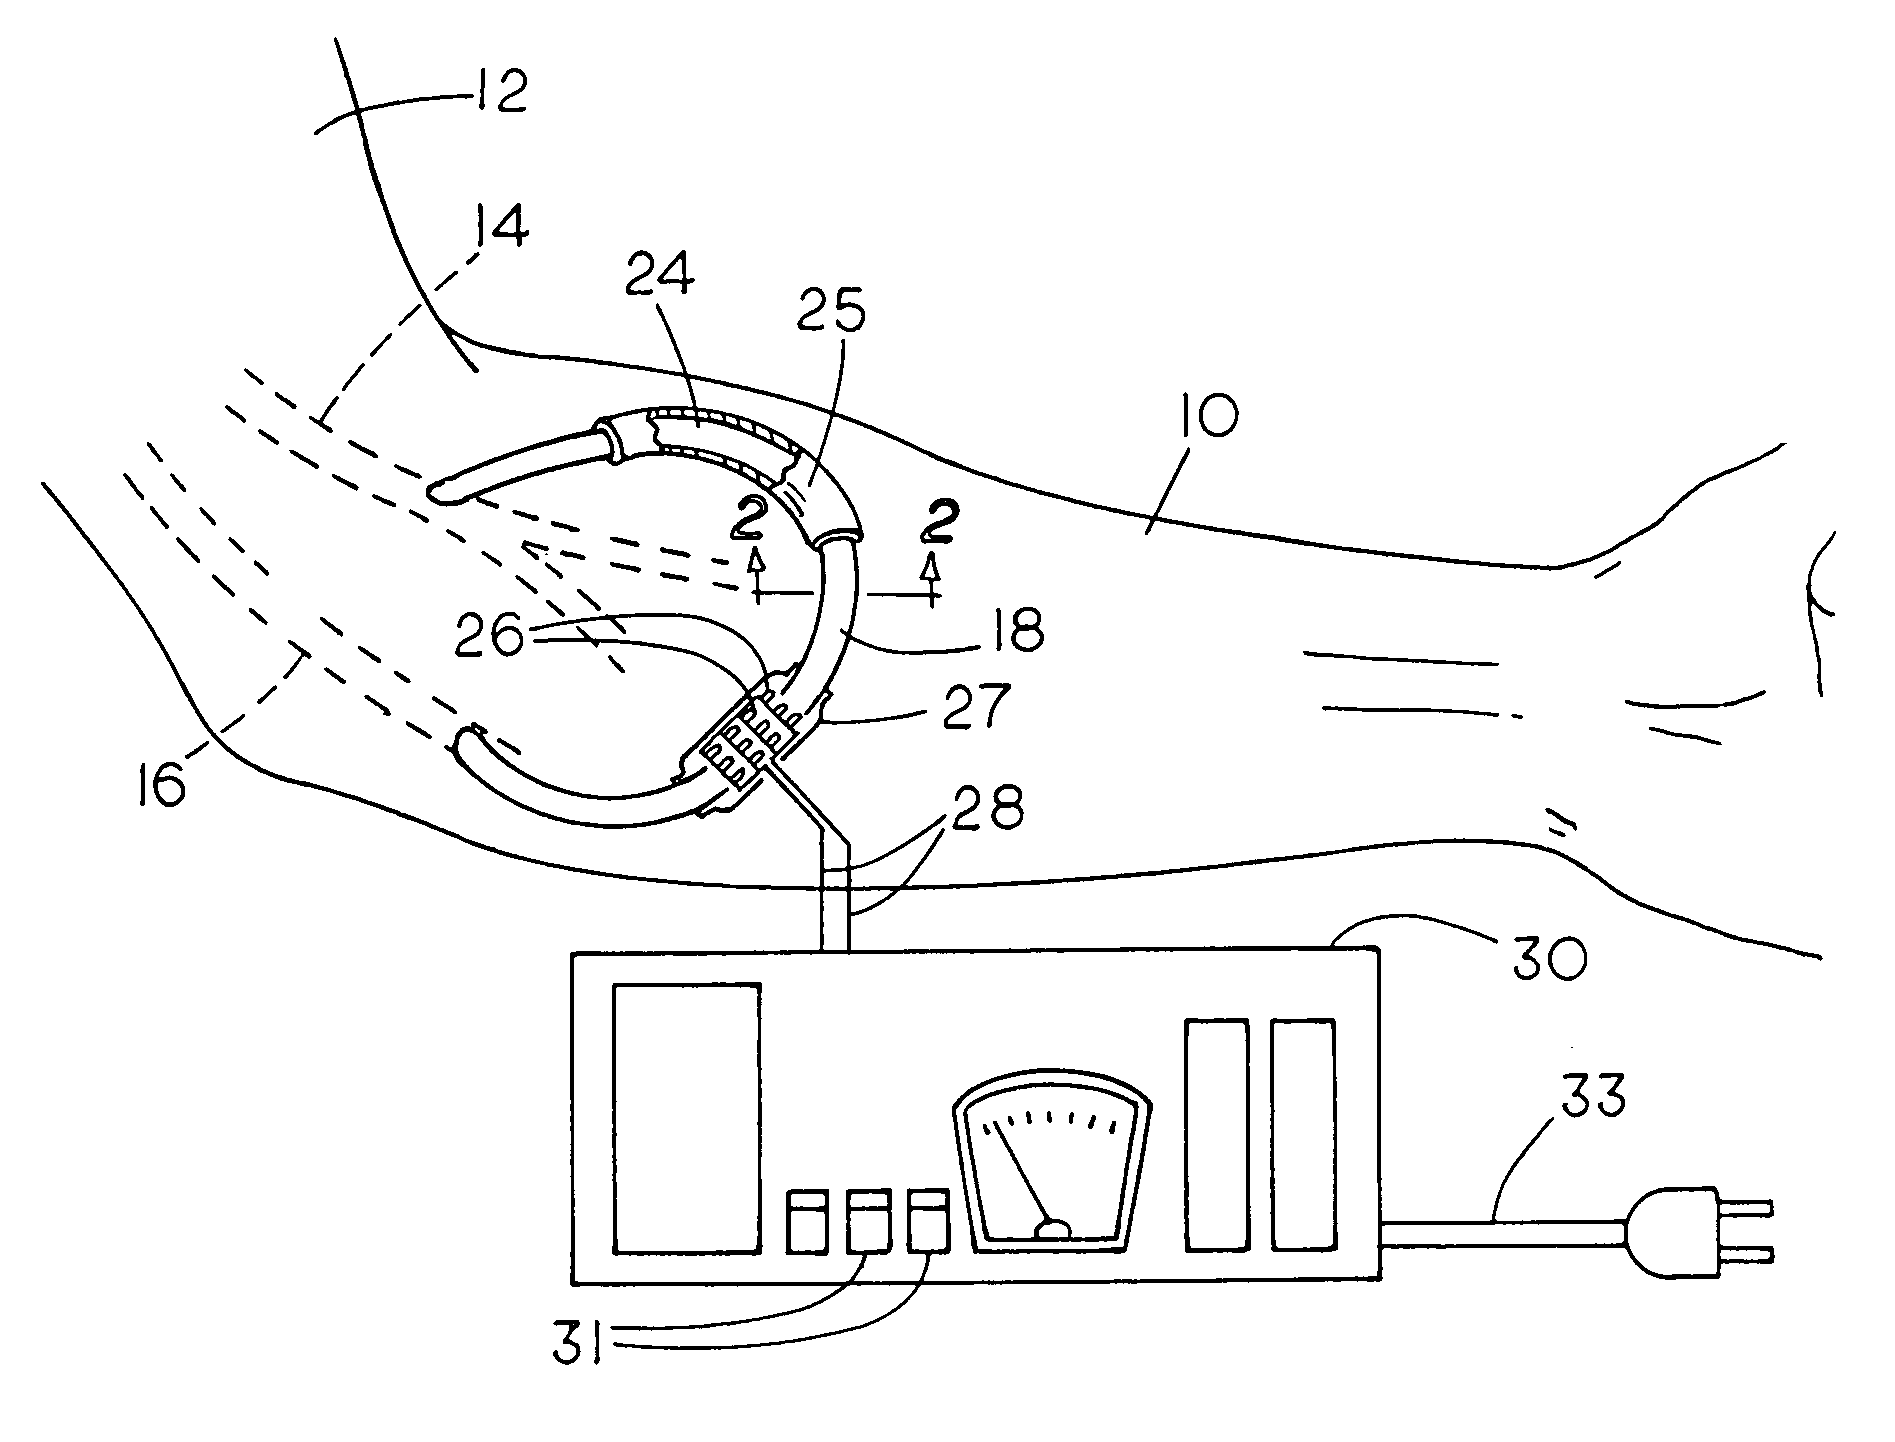 Method and apparatus for preventing dialysis graft intimal hyperplasia